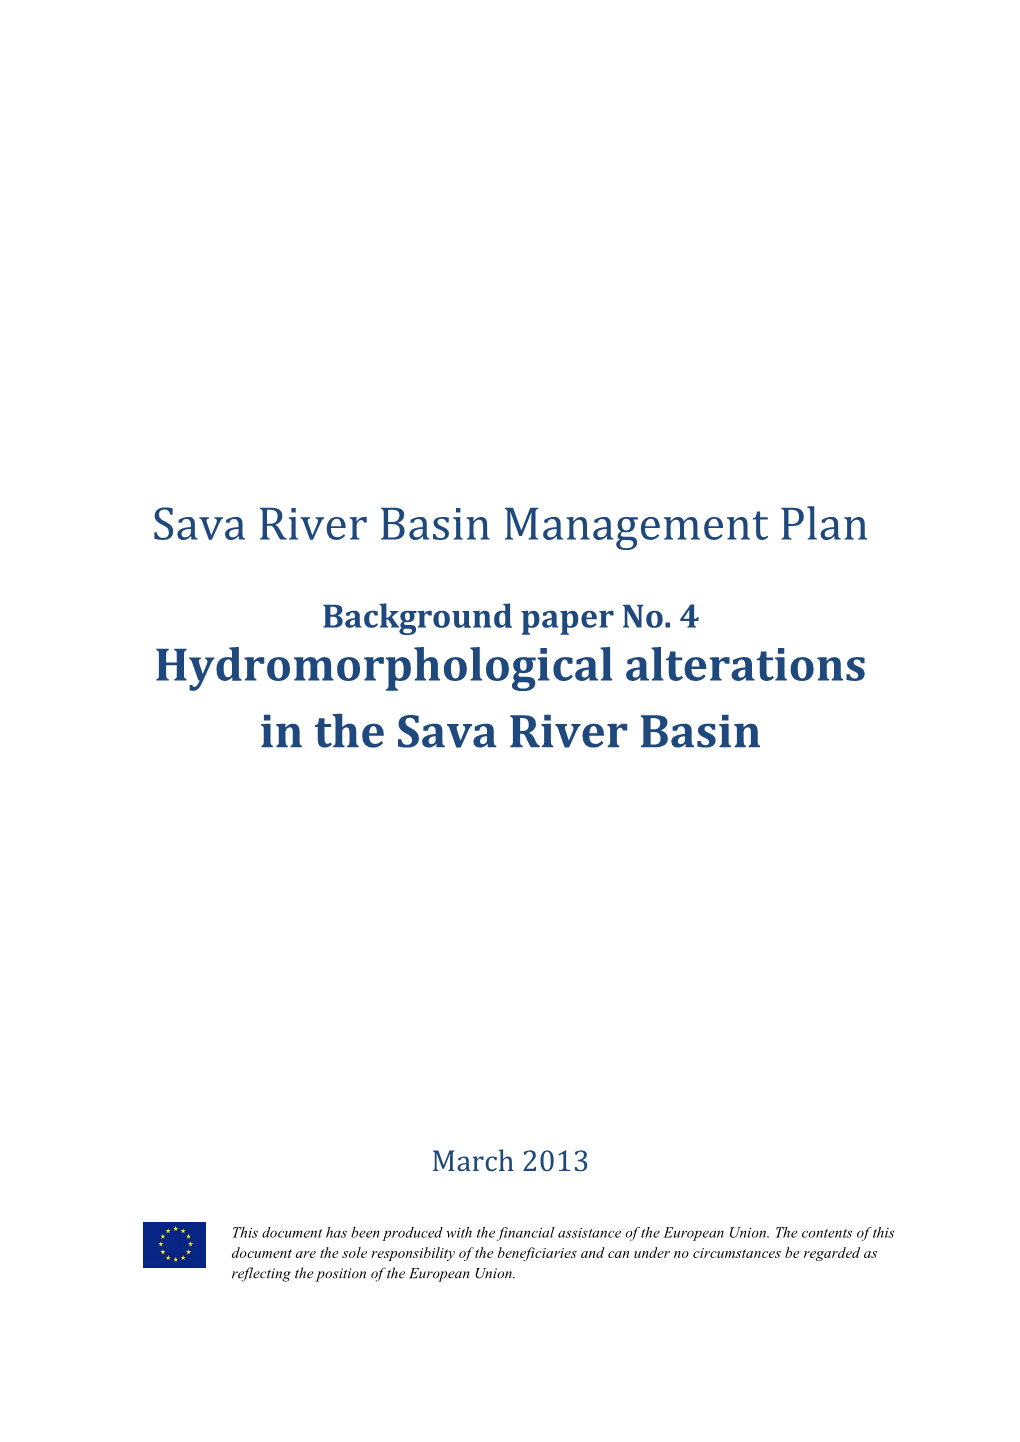 Background Paper No. 4 Hydromorphological Alterations in the Sava River Basin